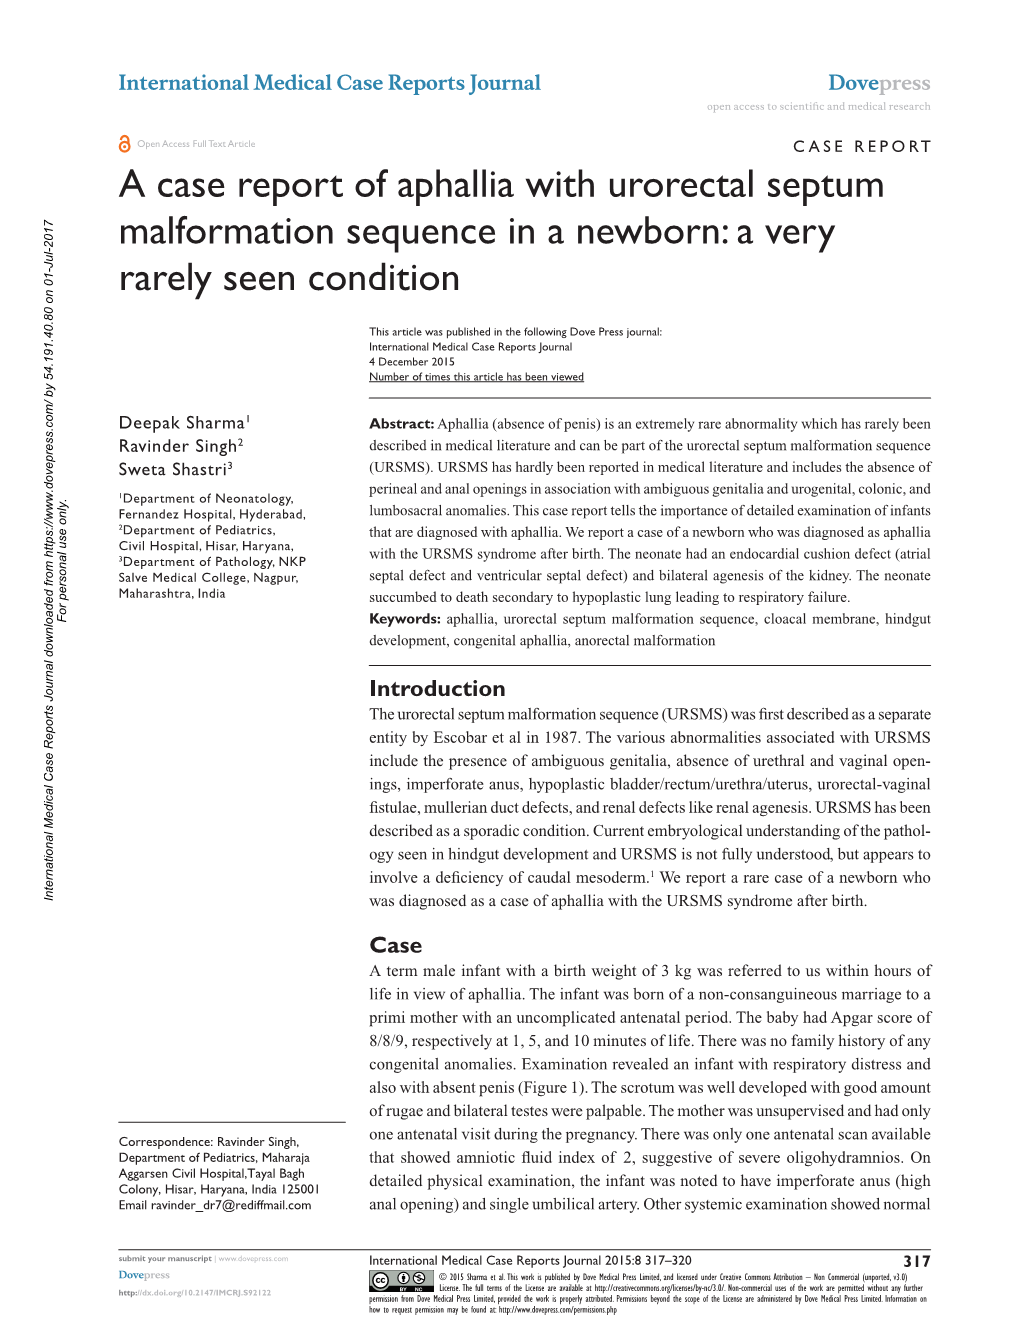 A Case Report of Aphallia with Urorectal Septum Malformation Sequence in a Newborn: a Very Rarely Seen Condition